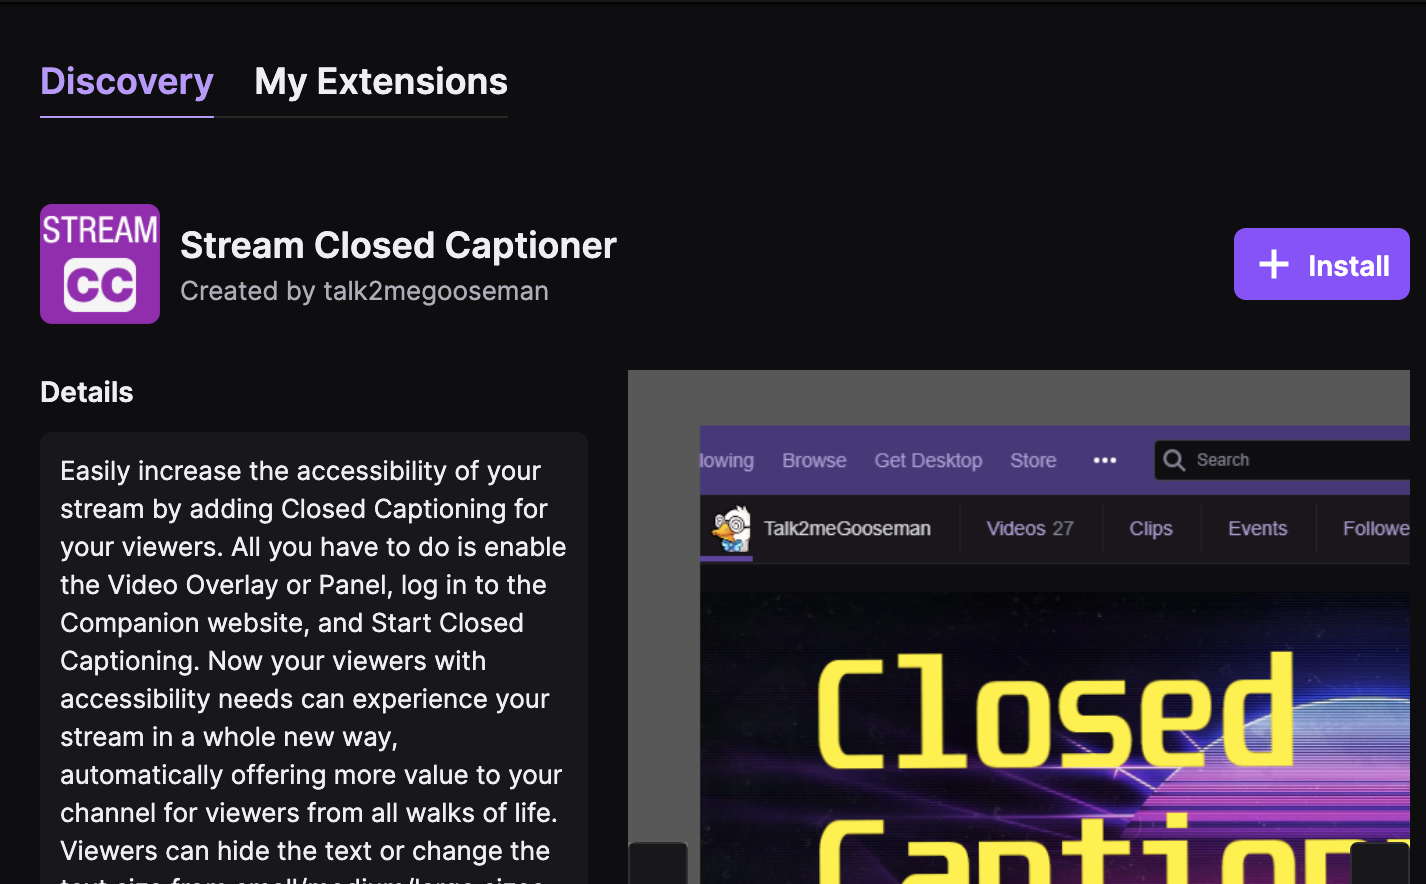 Image of the Twitch extension installation page